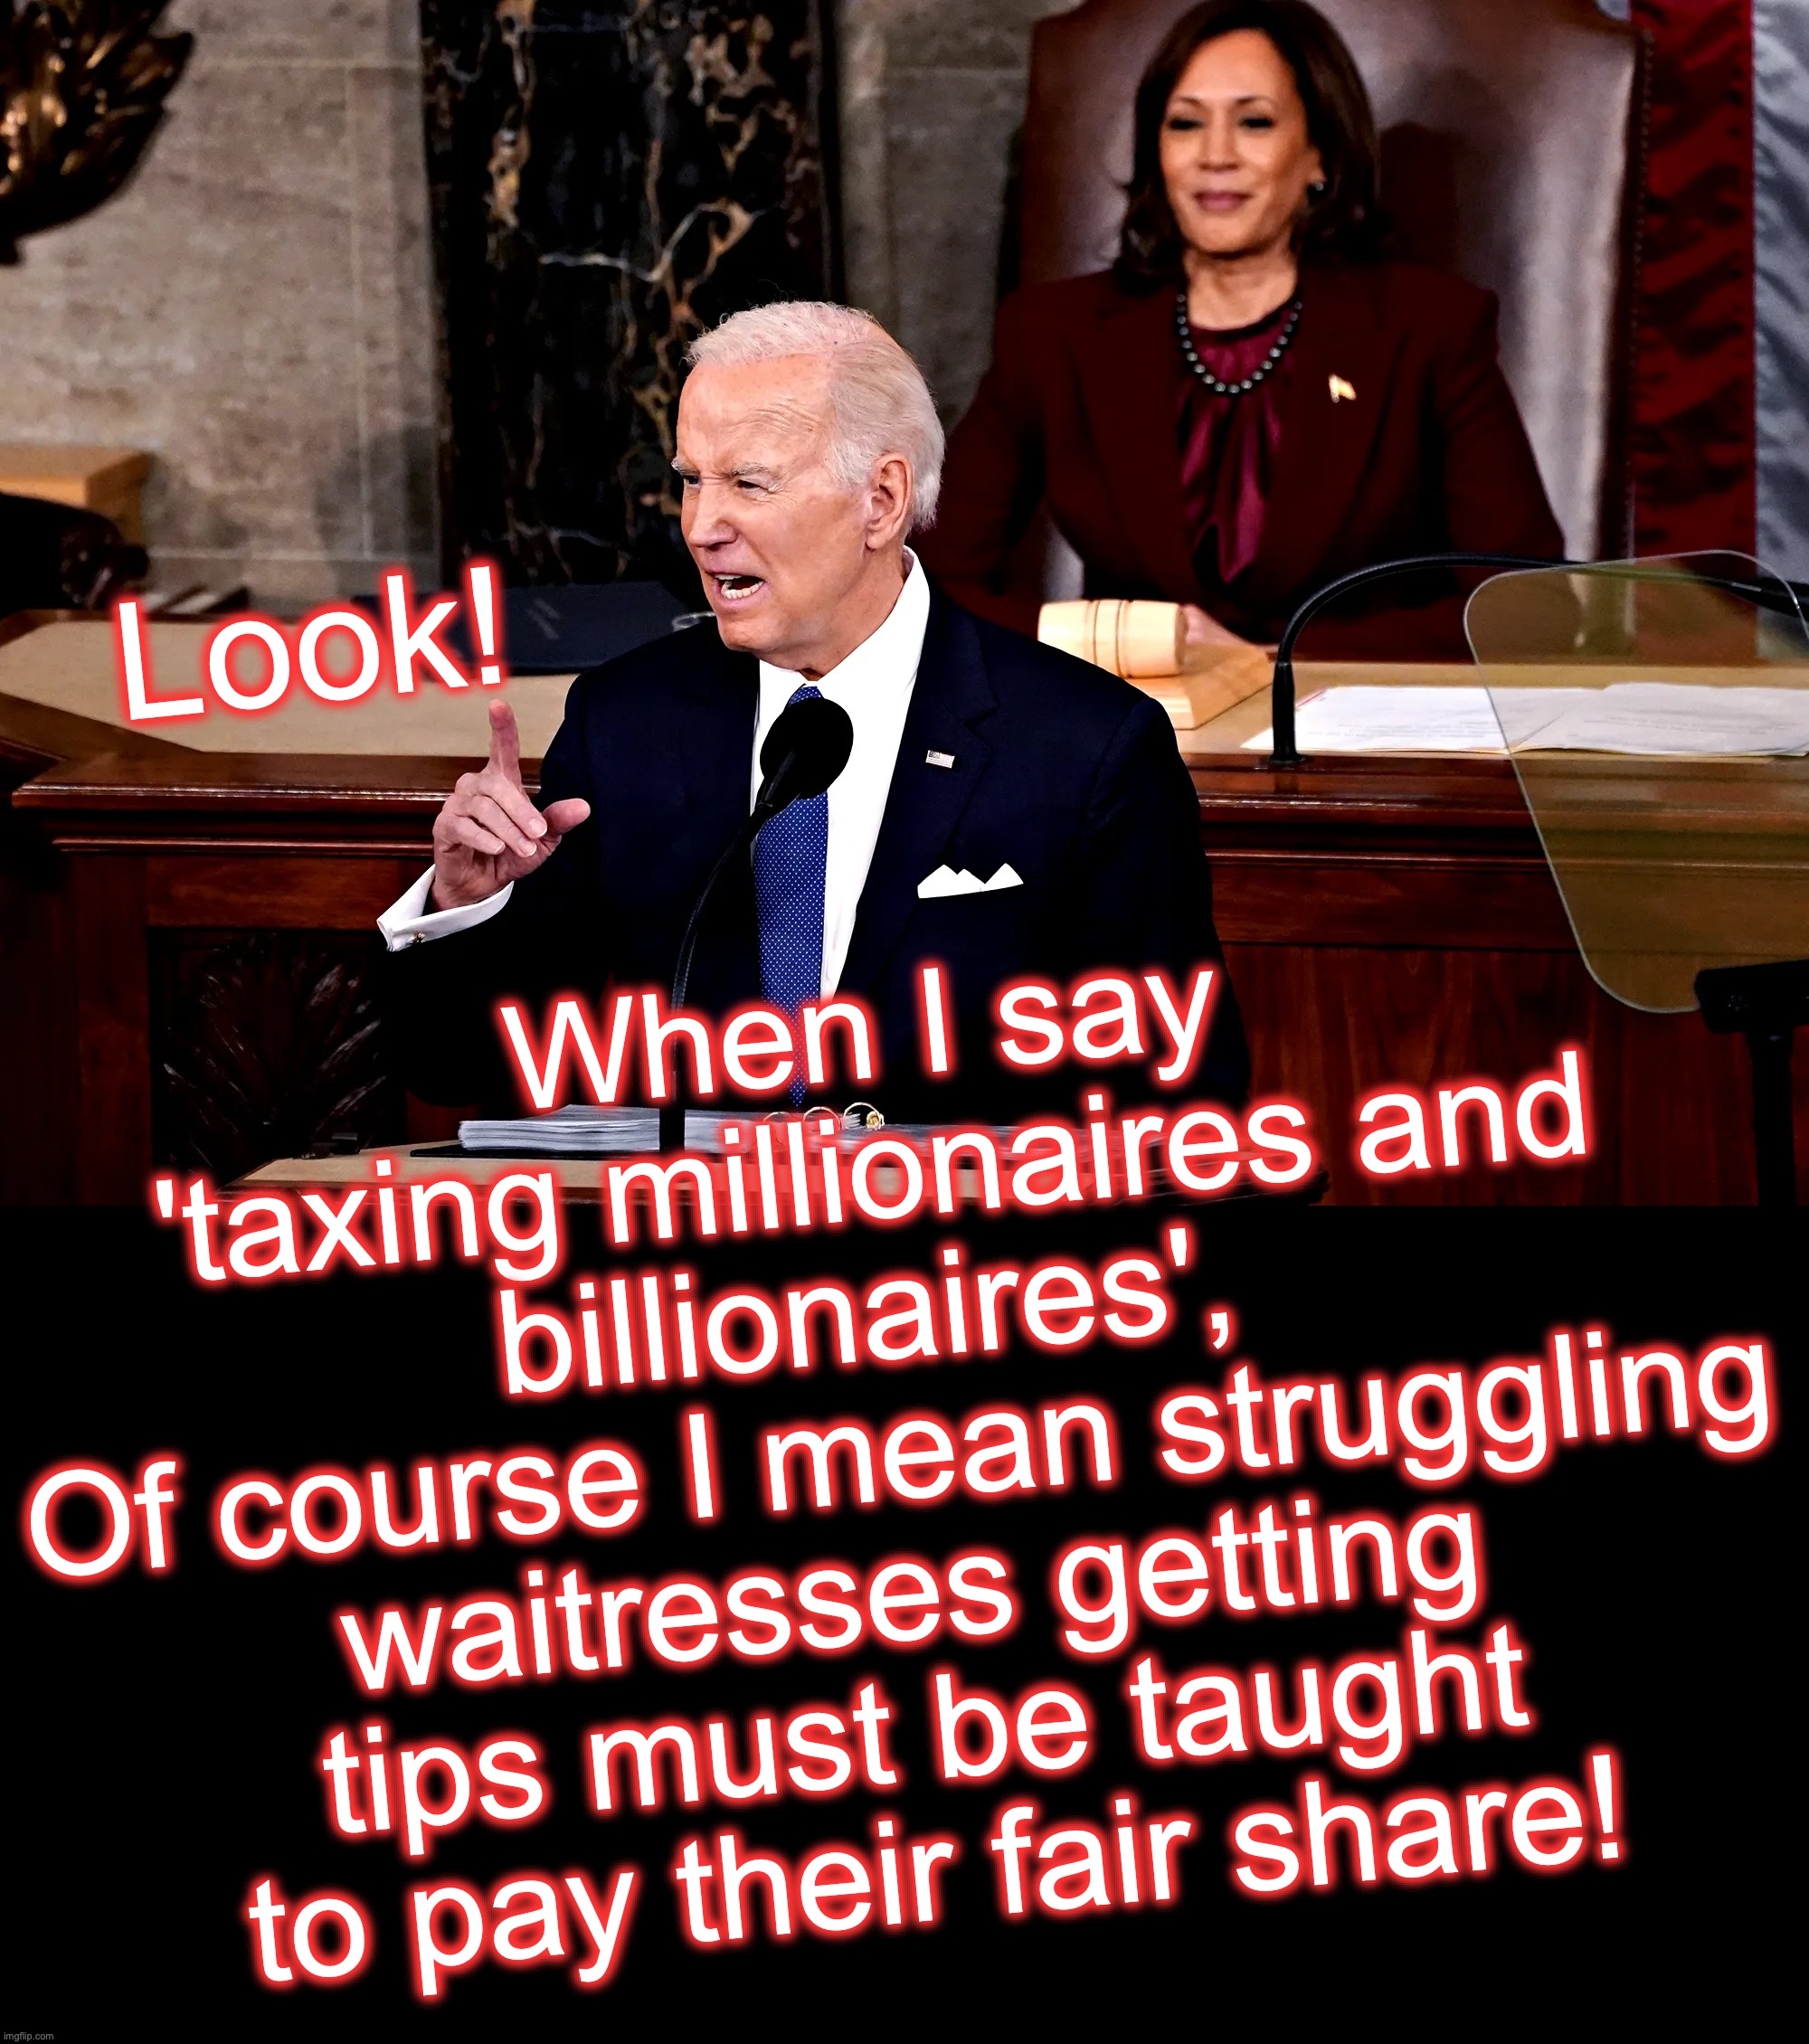 [warning: what-they-really-mean satire] | When I say 'taxing millionaires and billionaires', 
Of course I mean struggling waitresses getting tips must be taught to pay their fair share! Look! | image tagged in biden,taxes | made w/ Imgflip meme maker